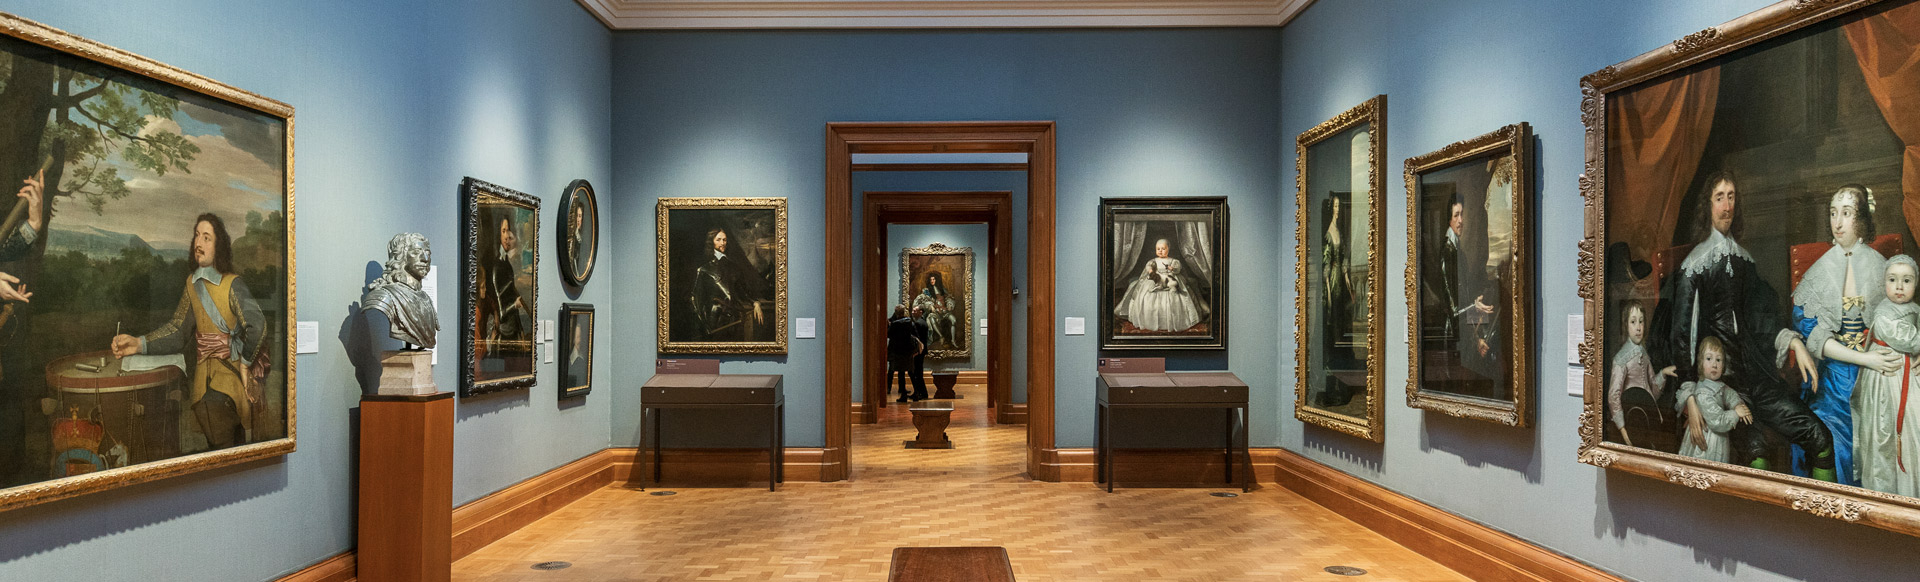 Interior of the National Portrait Gallery with paintings and sculptures.